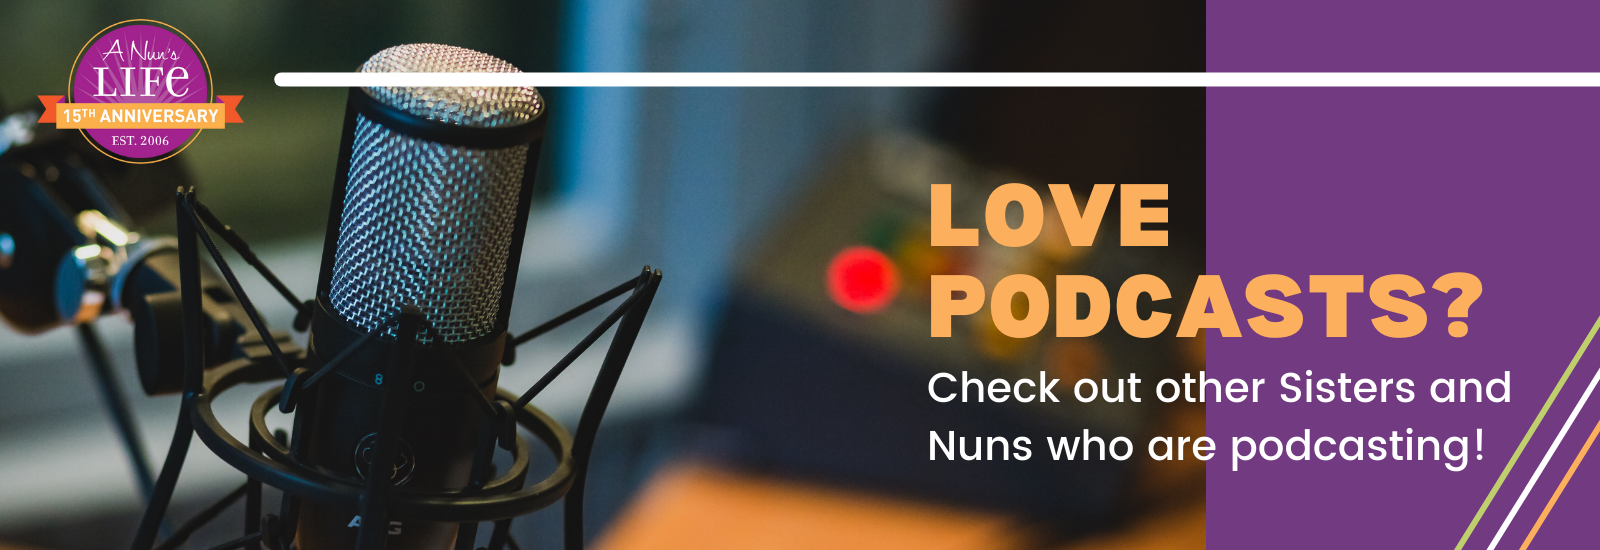 Check out other podcasts by Catholic sisters and nuns!